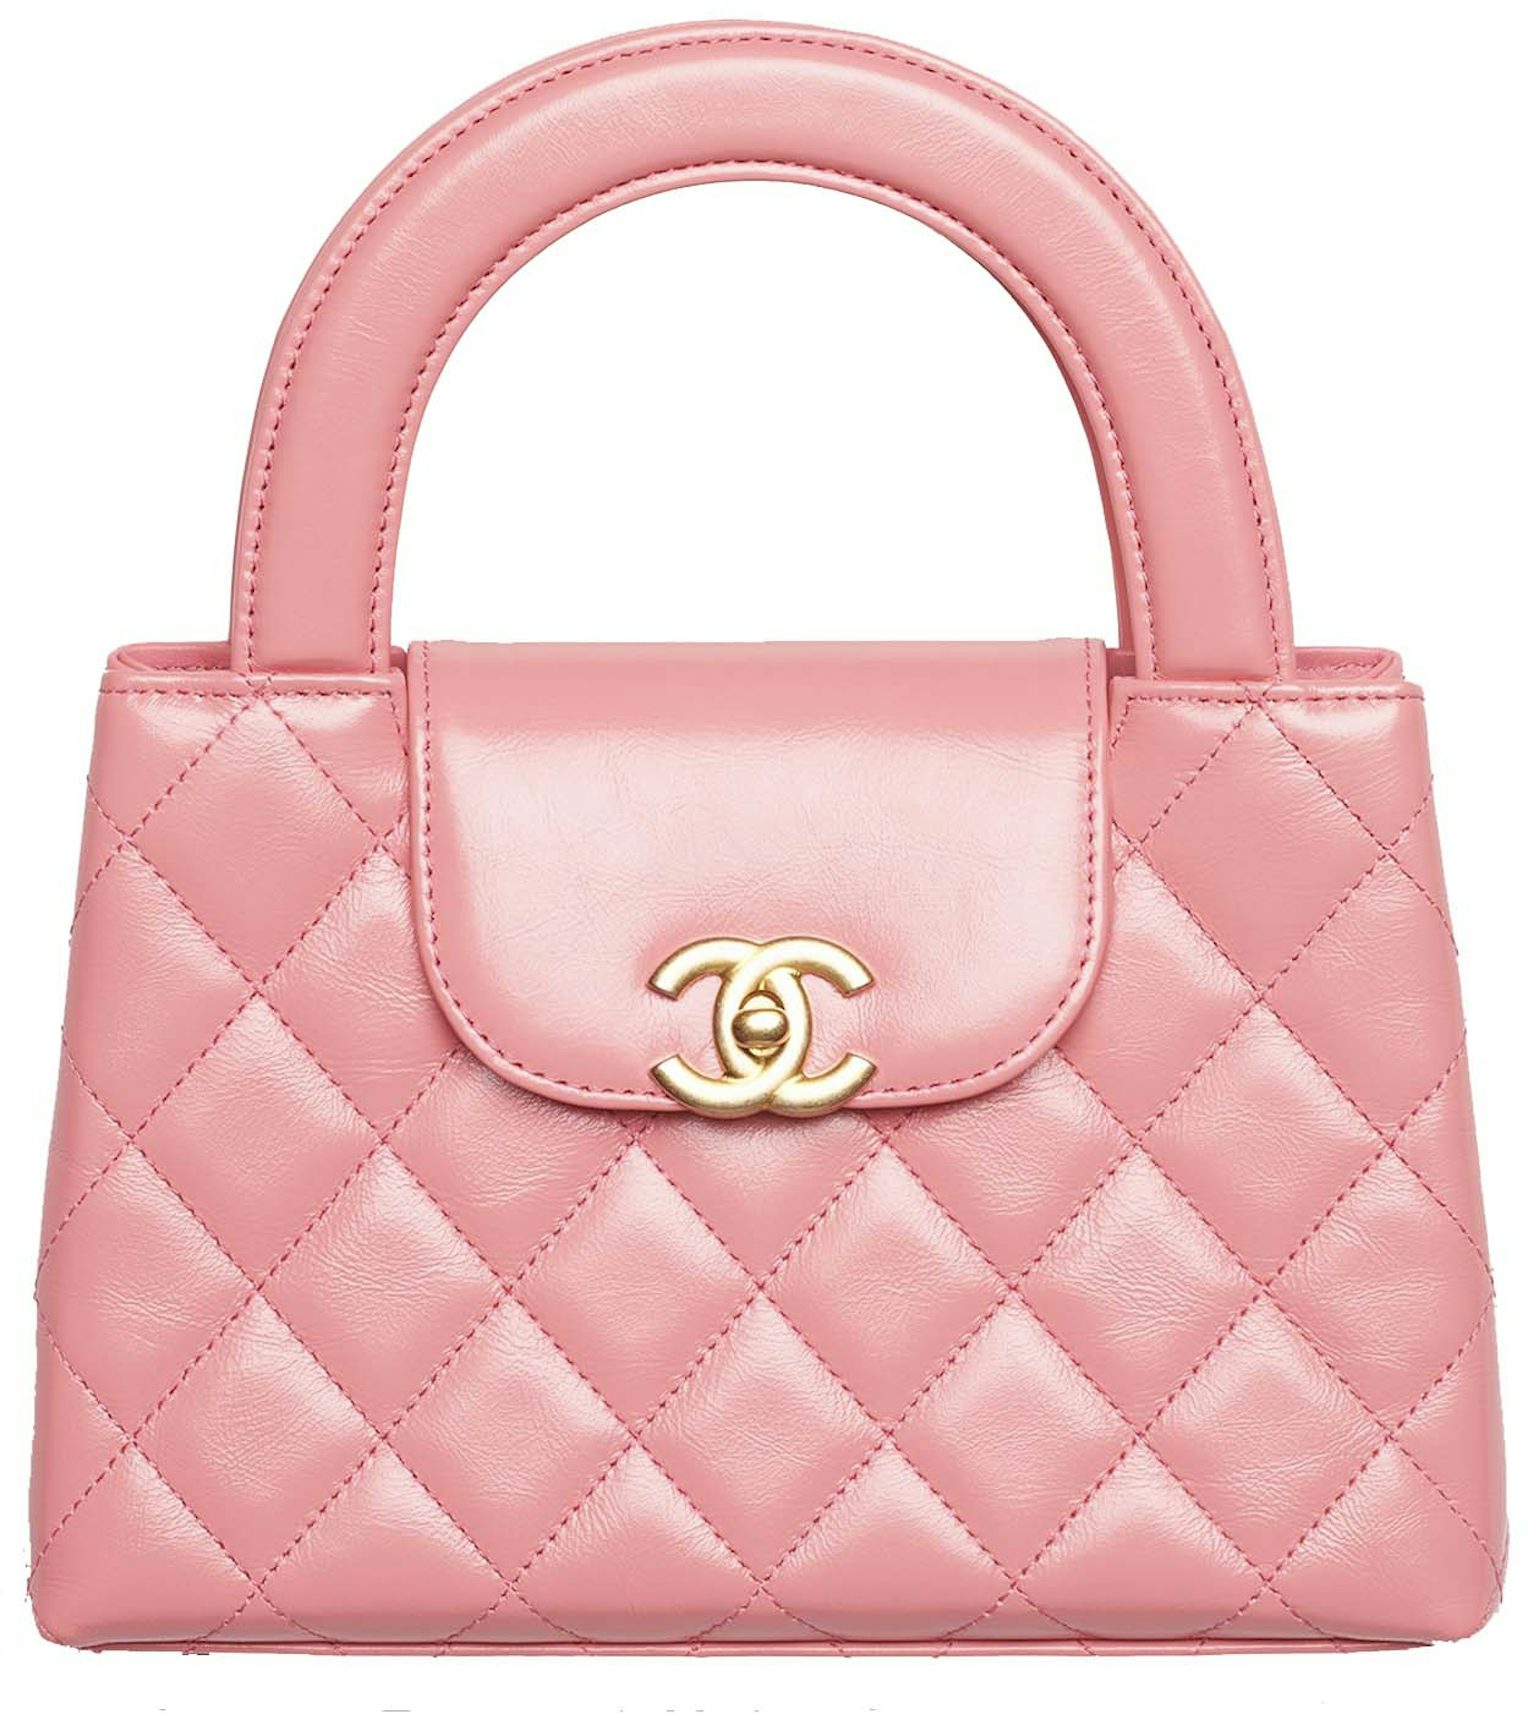 Chanel 22 Mini Quilted Hobo Tote, Rose Gold Calfskin with Gold